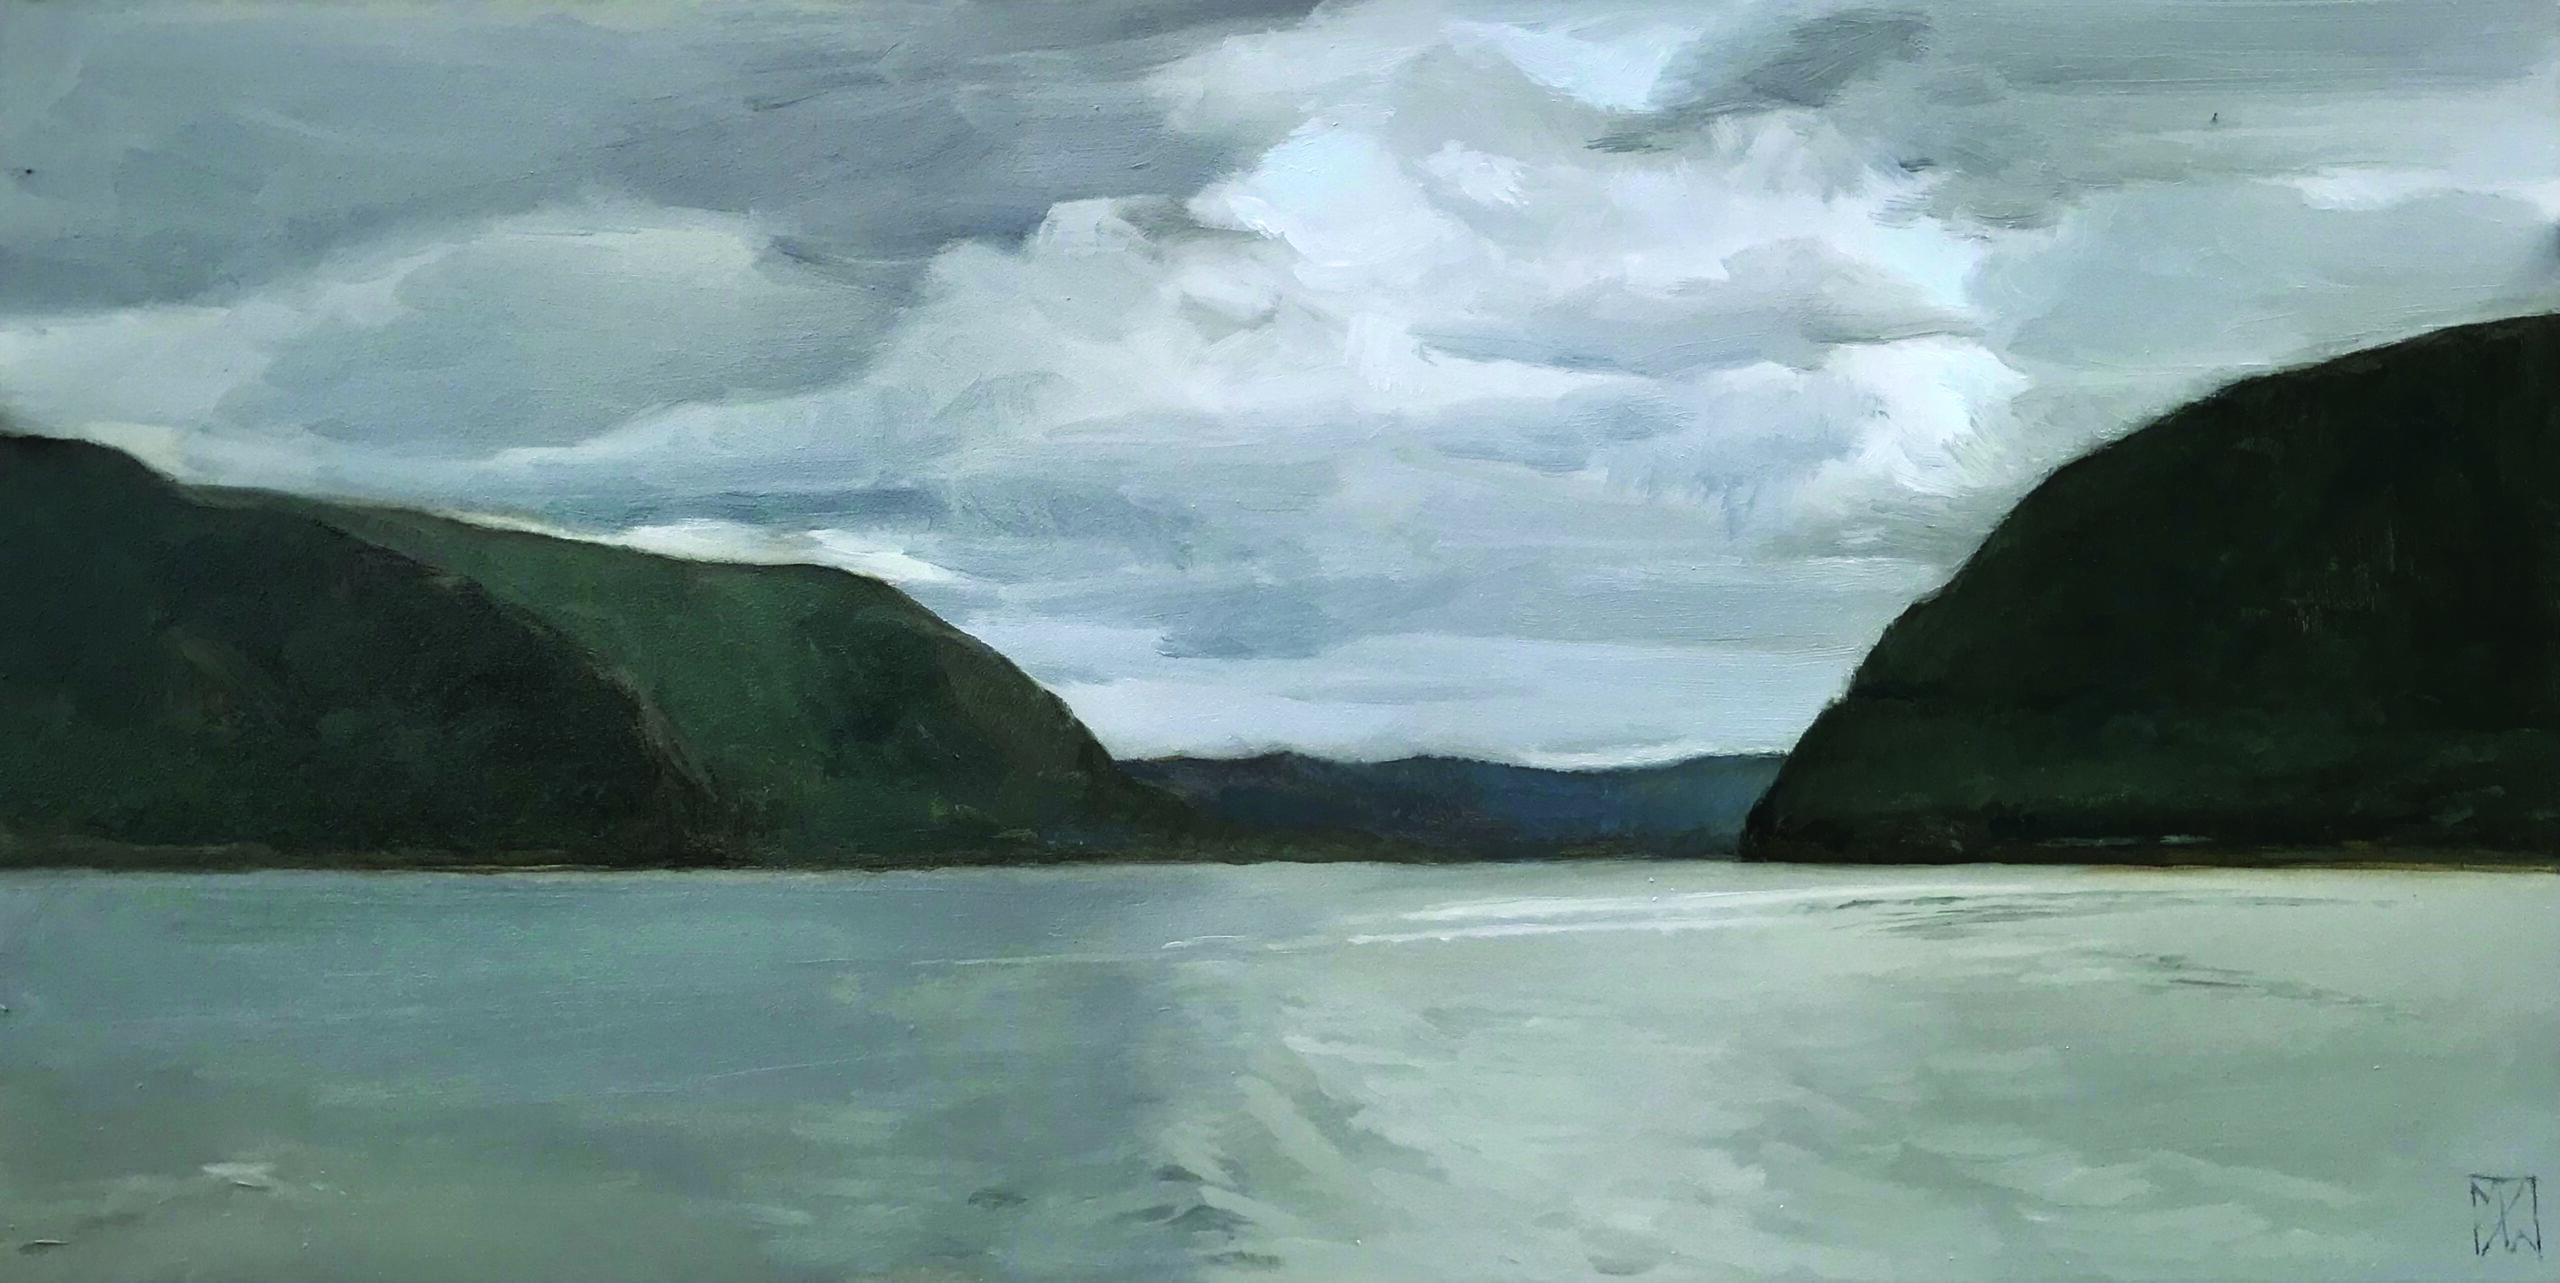 Mary Jane Ward, “Looking South on the Hudson from Plum Point,” 2021, oil, 6 x 12 in., Collection the artist, Plein air painting